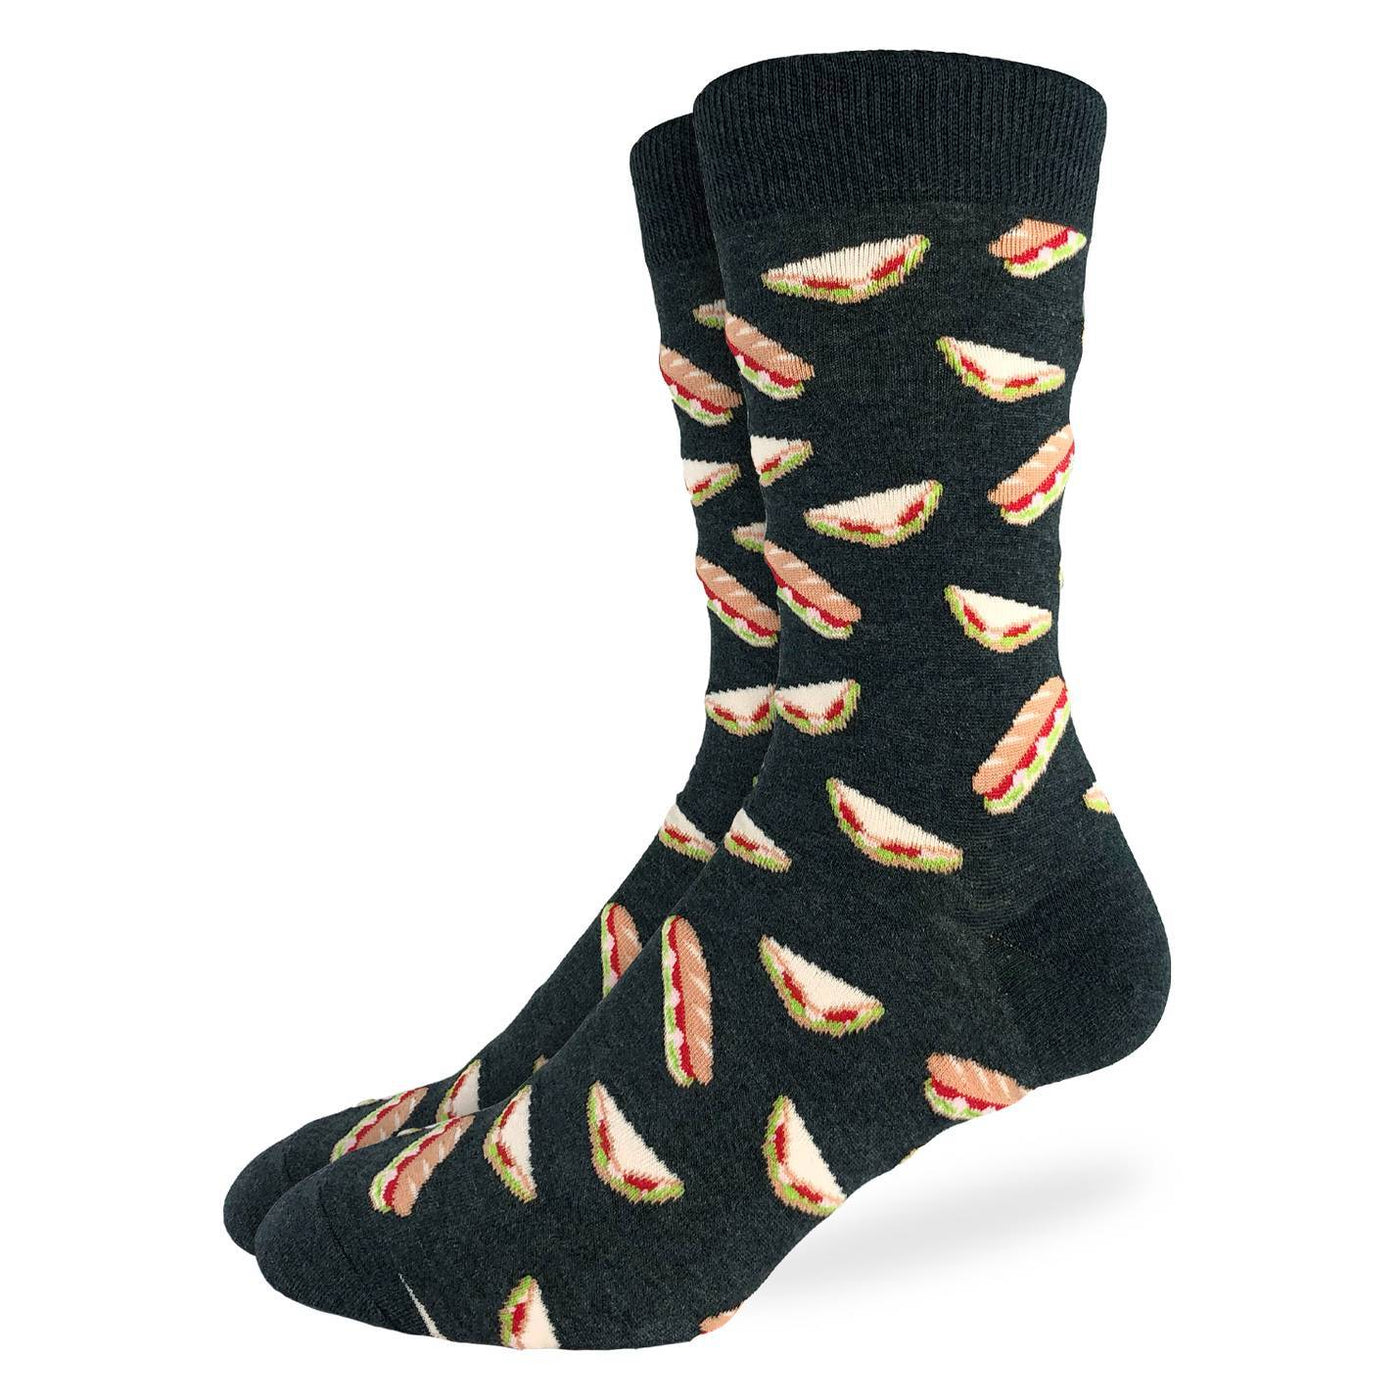 "Sandwiches" Cotton Crew Socks by Good Luck Sock-Large